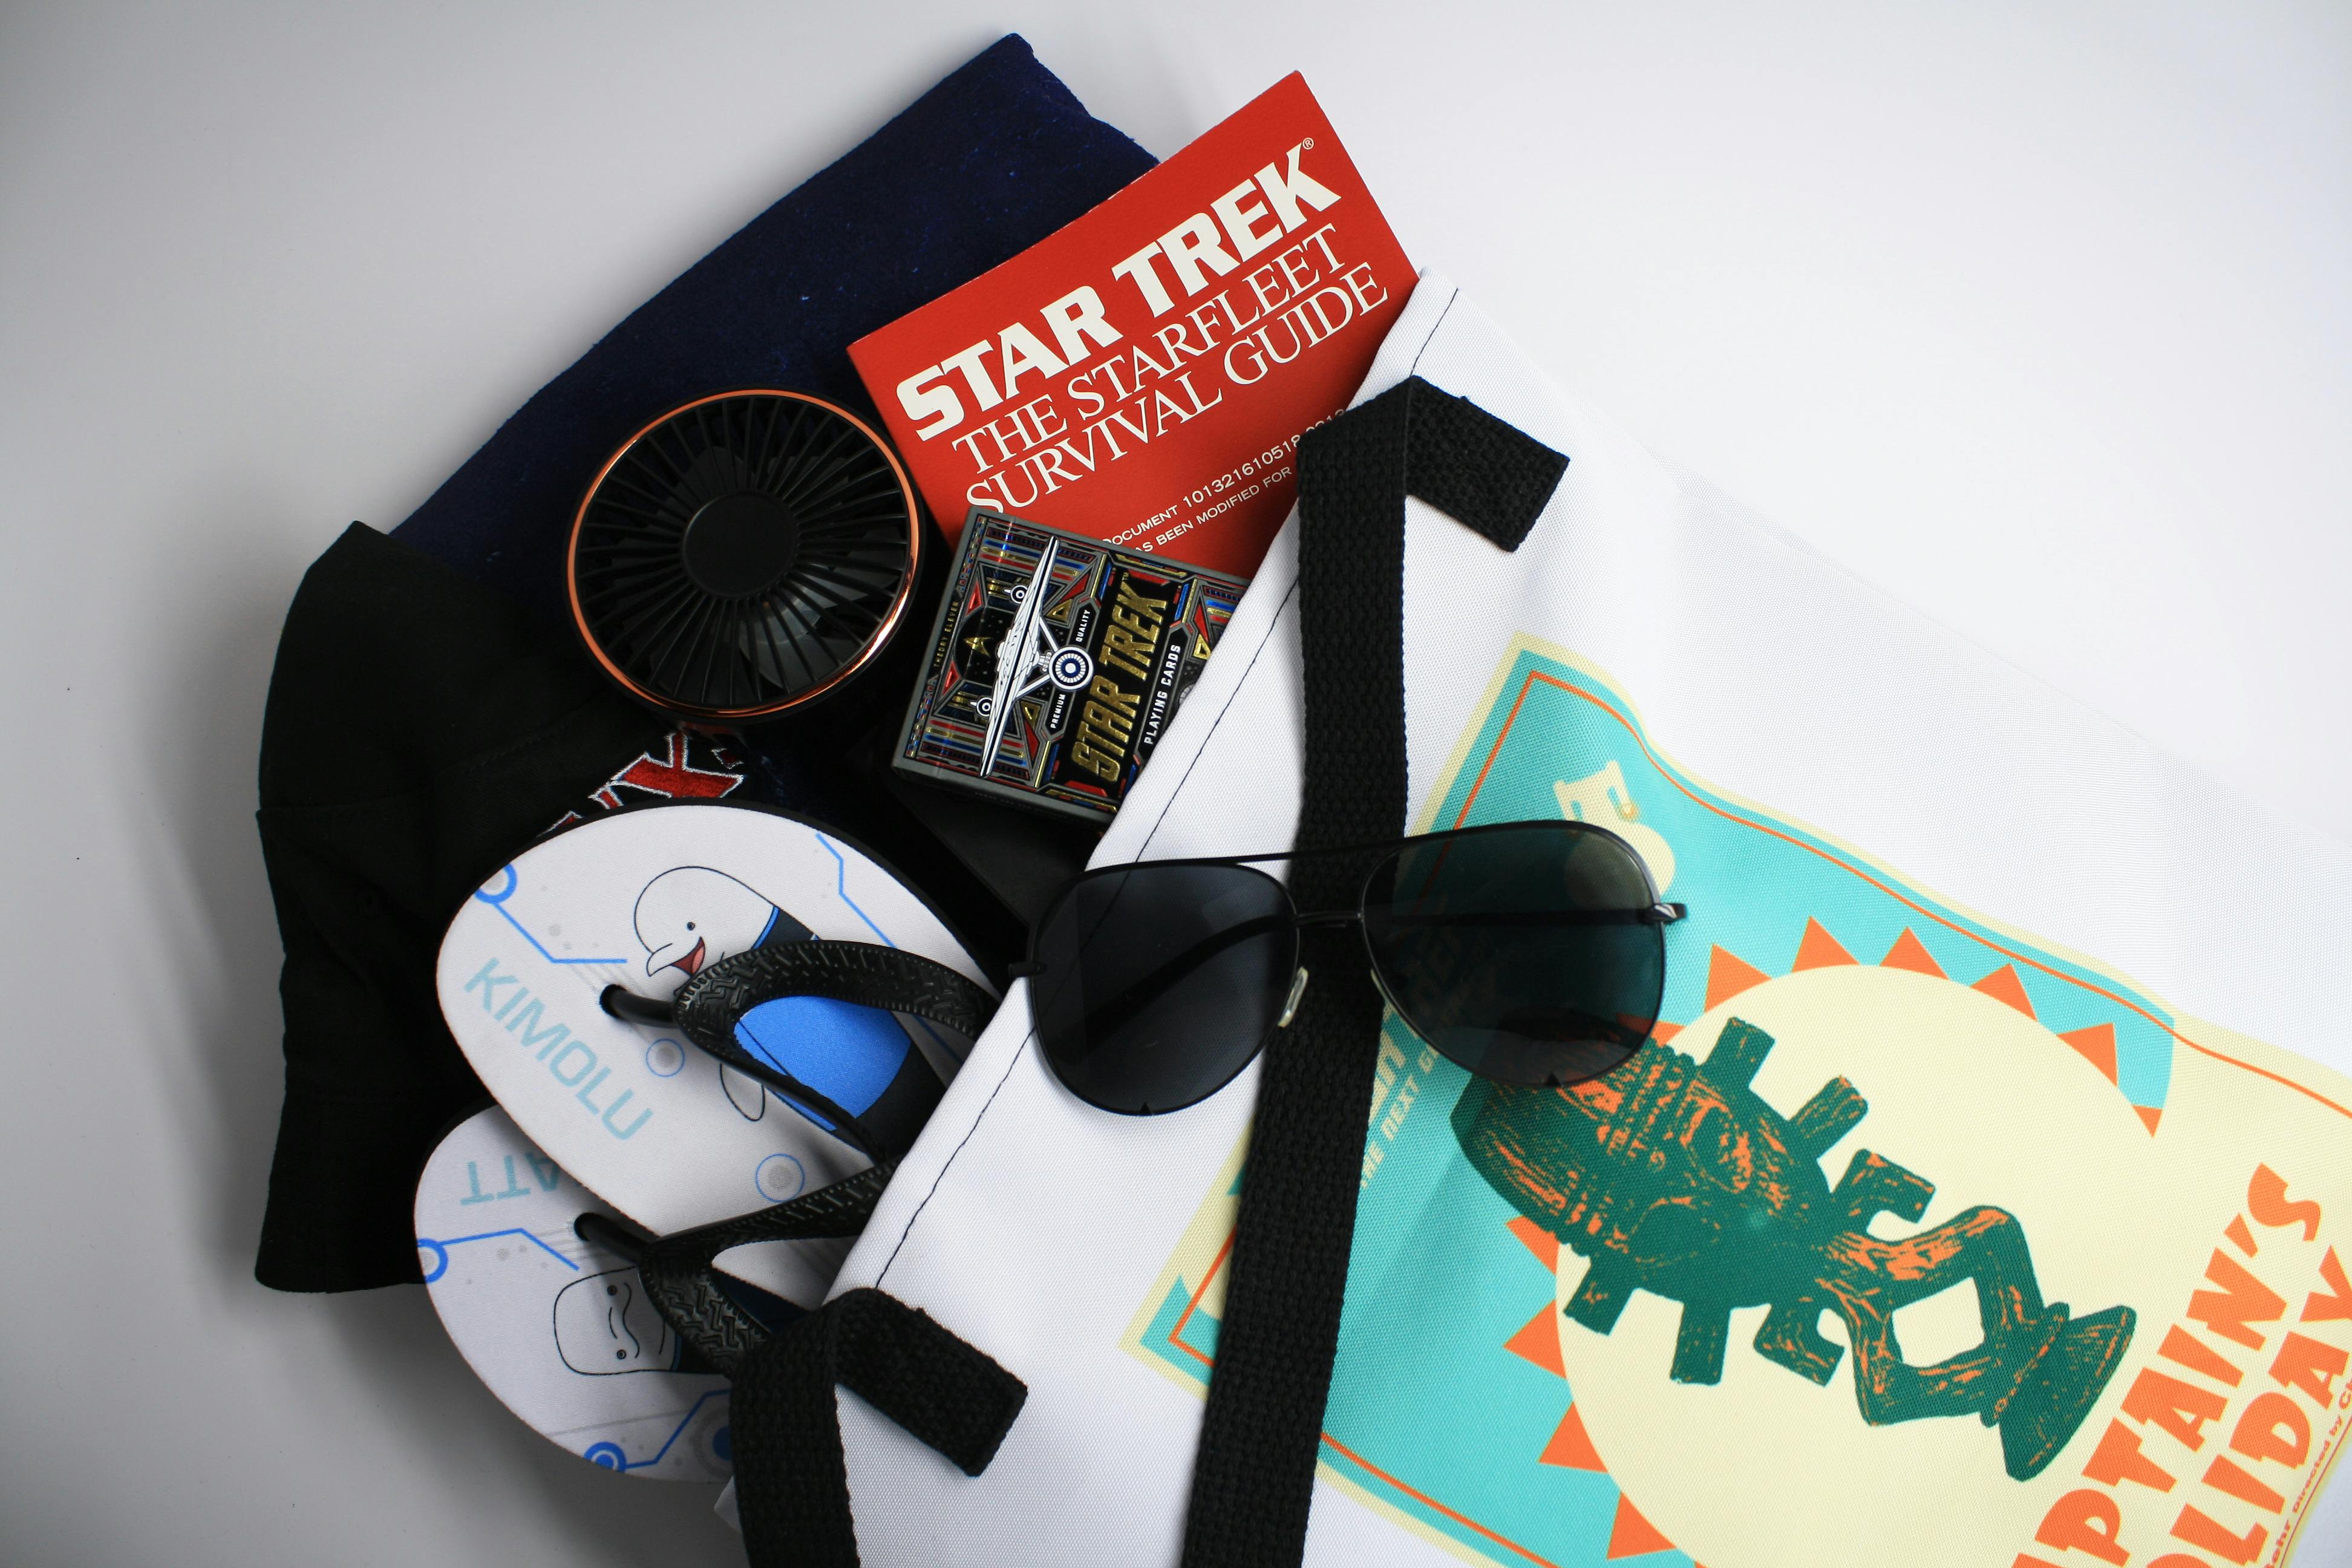 A Captain's Holiday canvas tote holding a pair of Star Trek: Lower Decks flip flops, a NX-01 bucket hat, a handheld fan, Star Trek playing card, Starfleet Survival Guide, and a pair of sunglasses